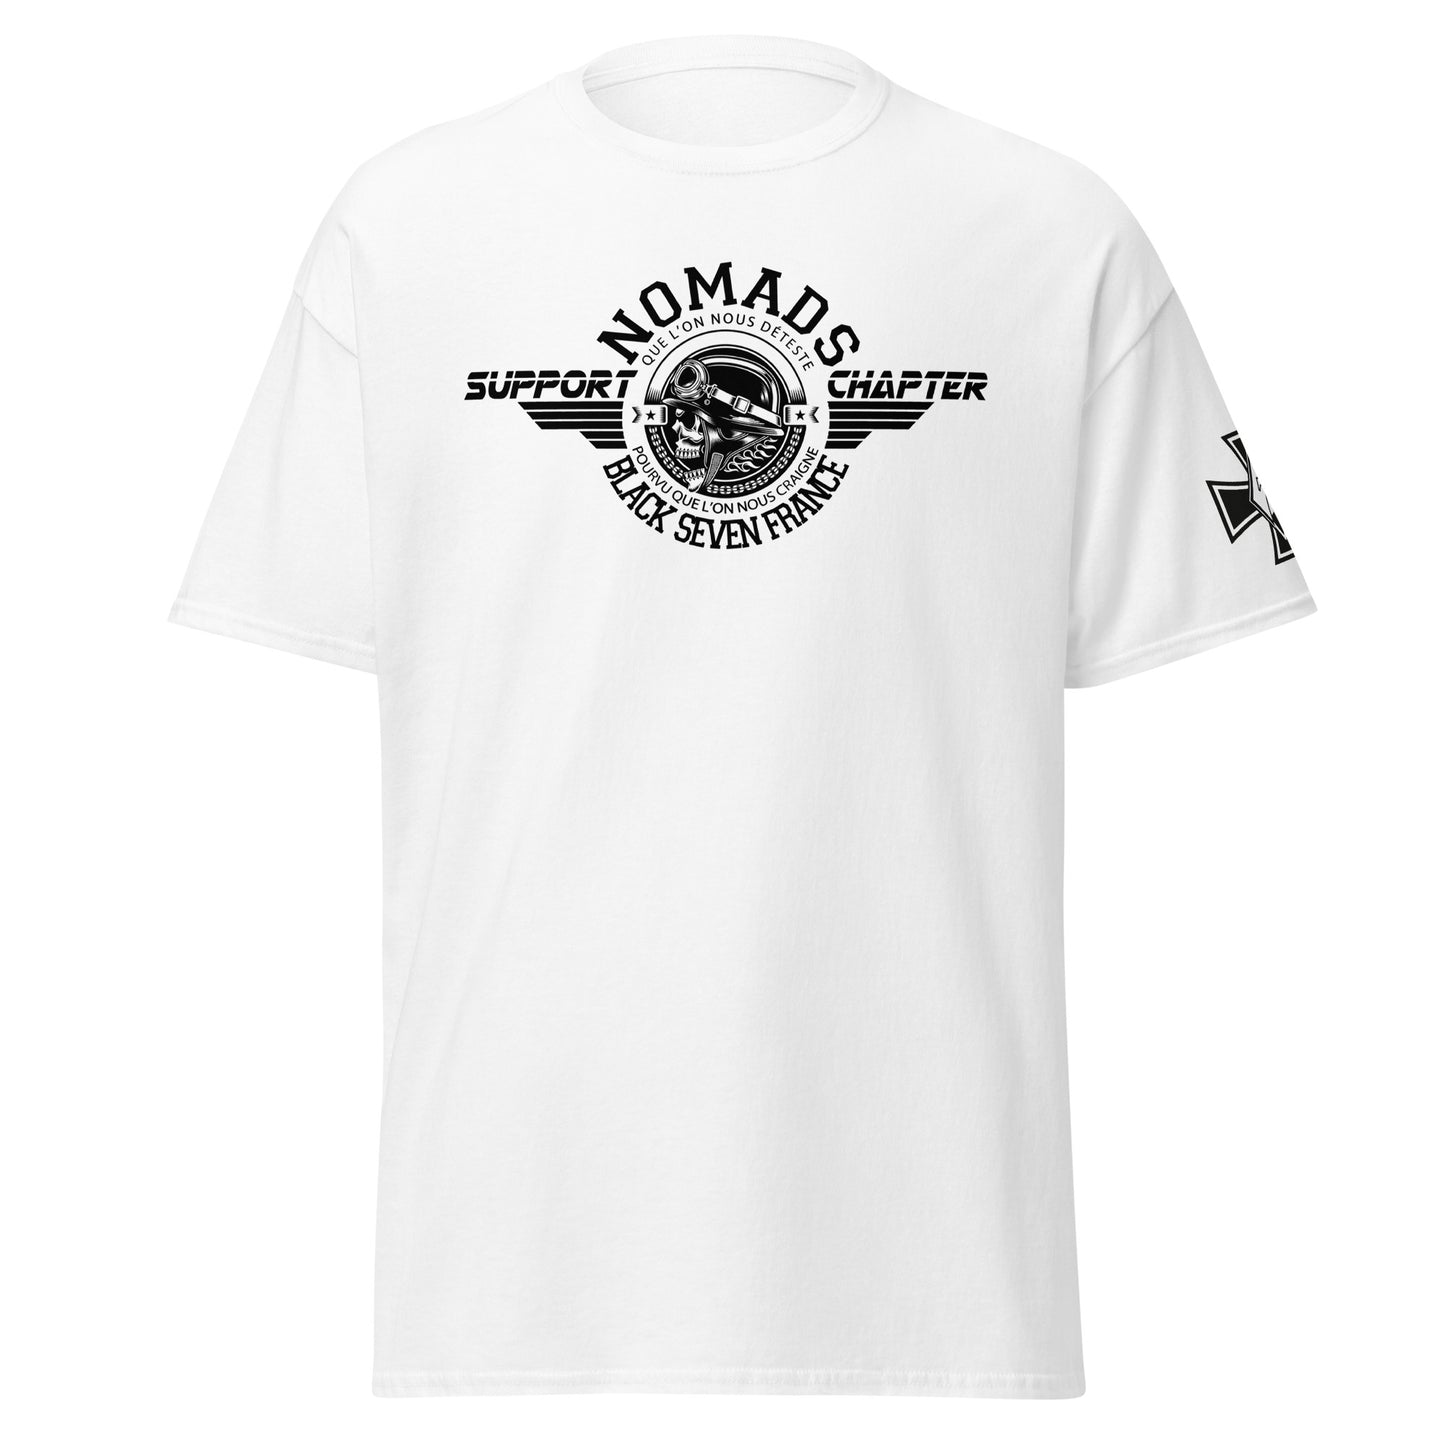 T-shirt « Support Nomads Chapter »